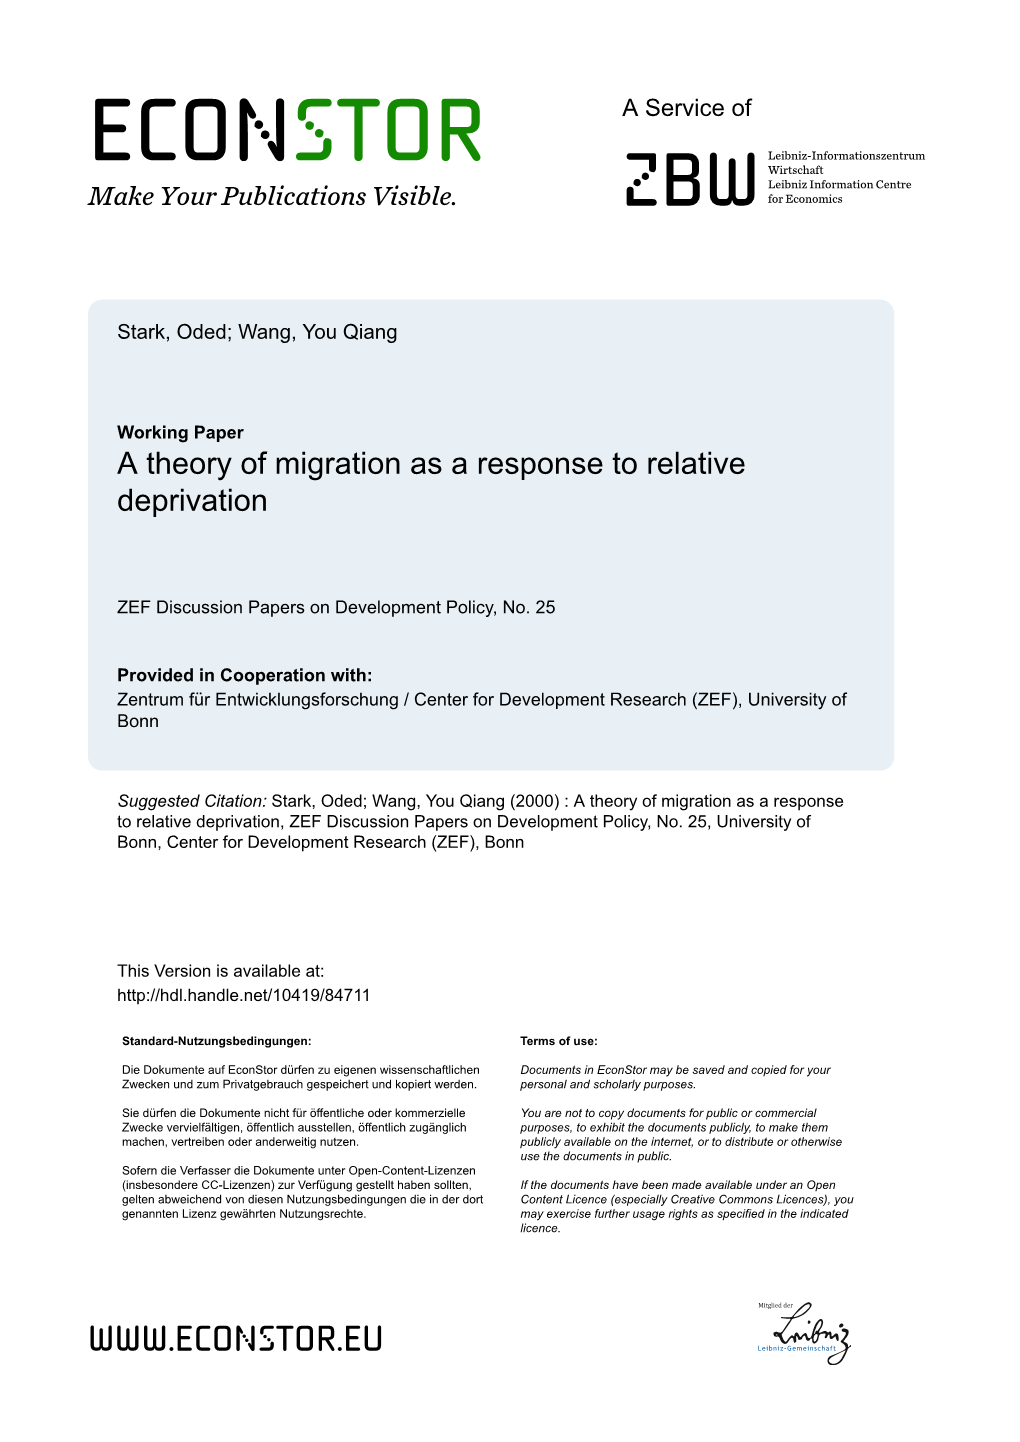 A Theory of Migration As a Response to Relative Deprivation